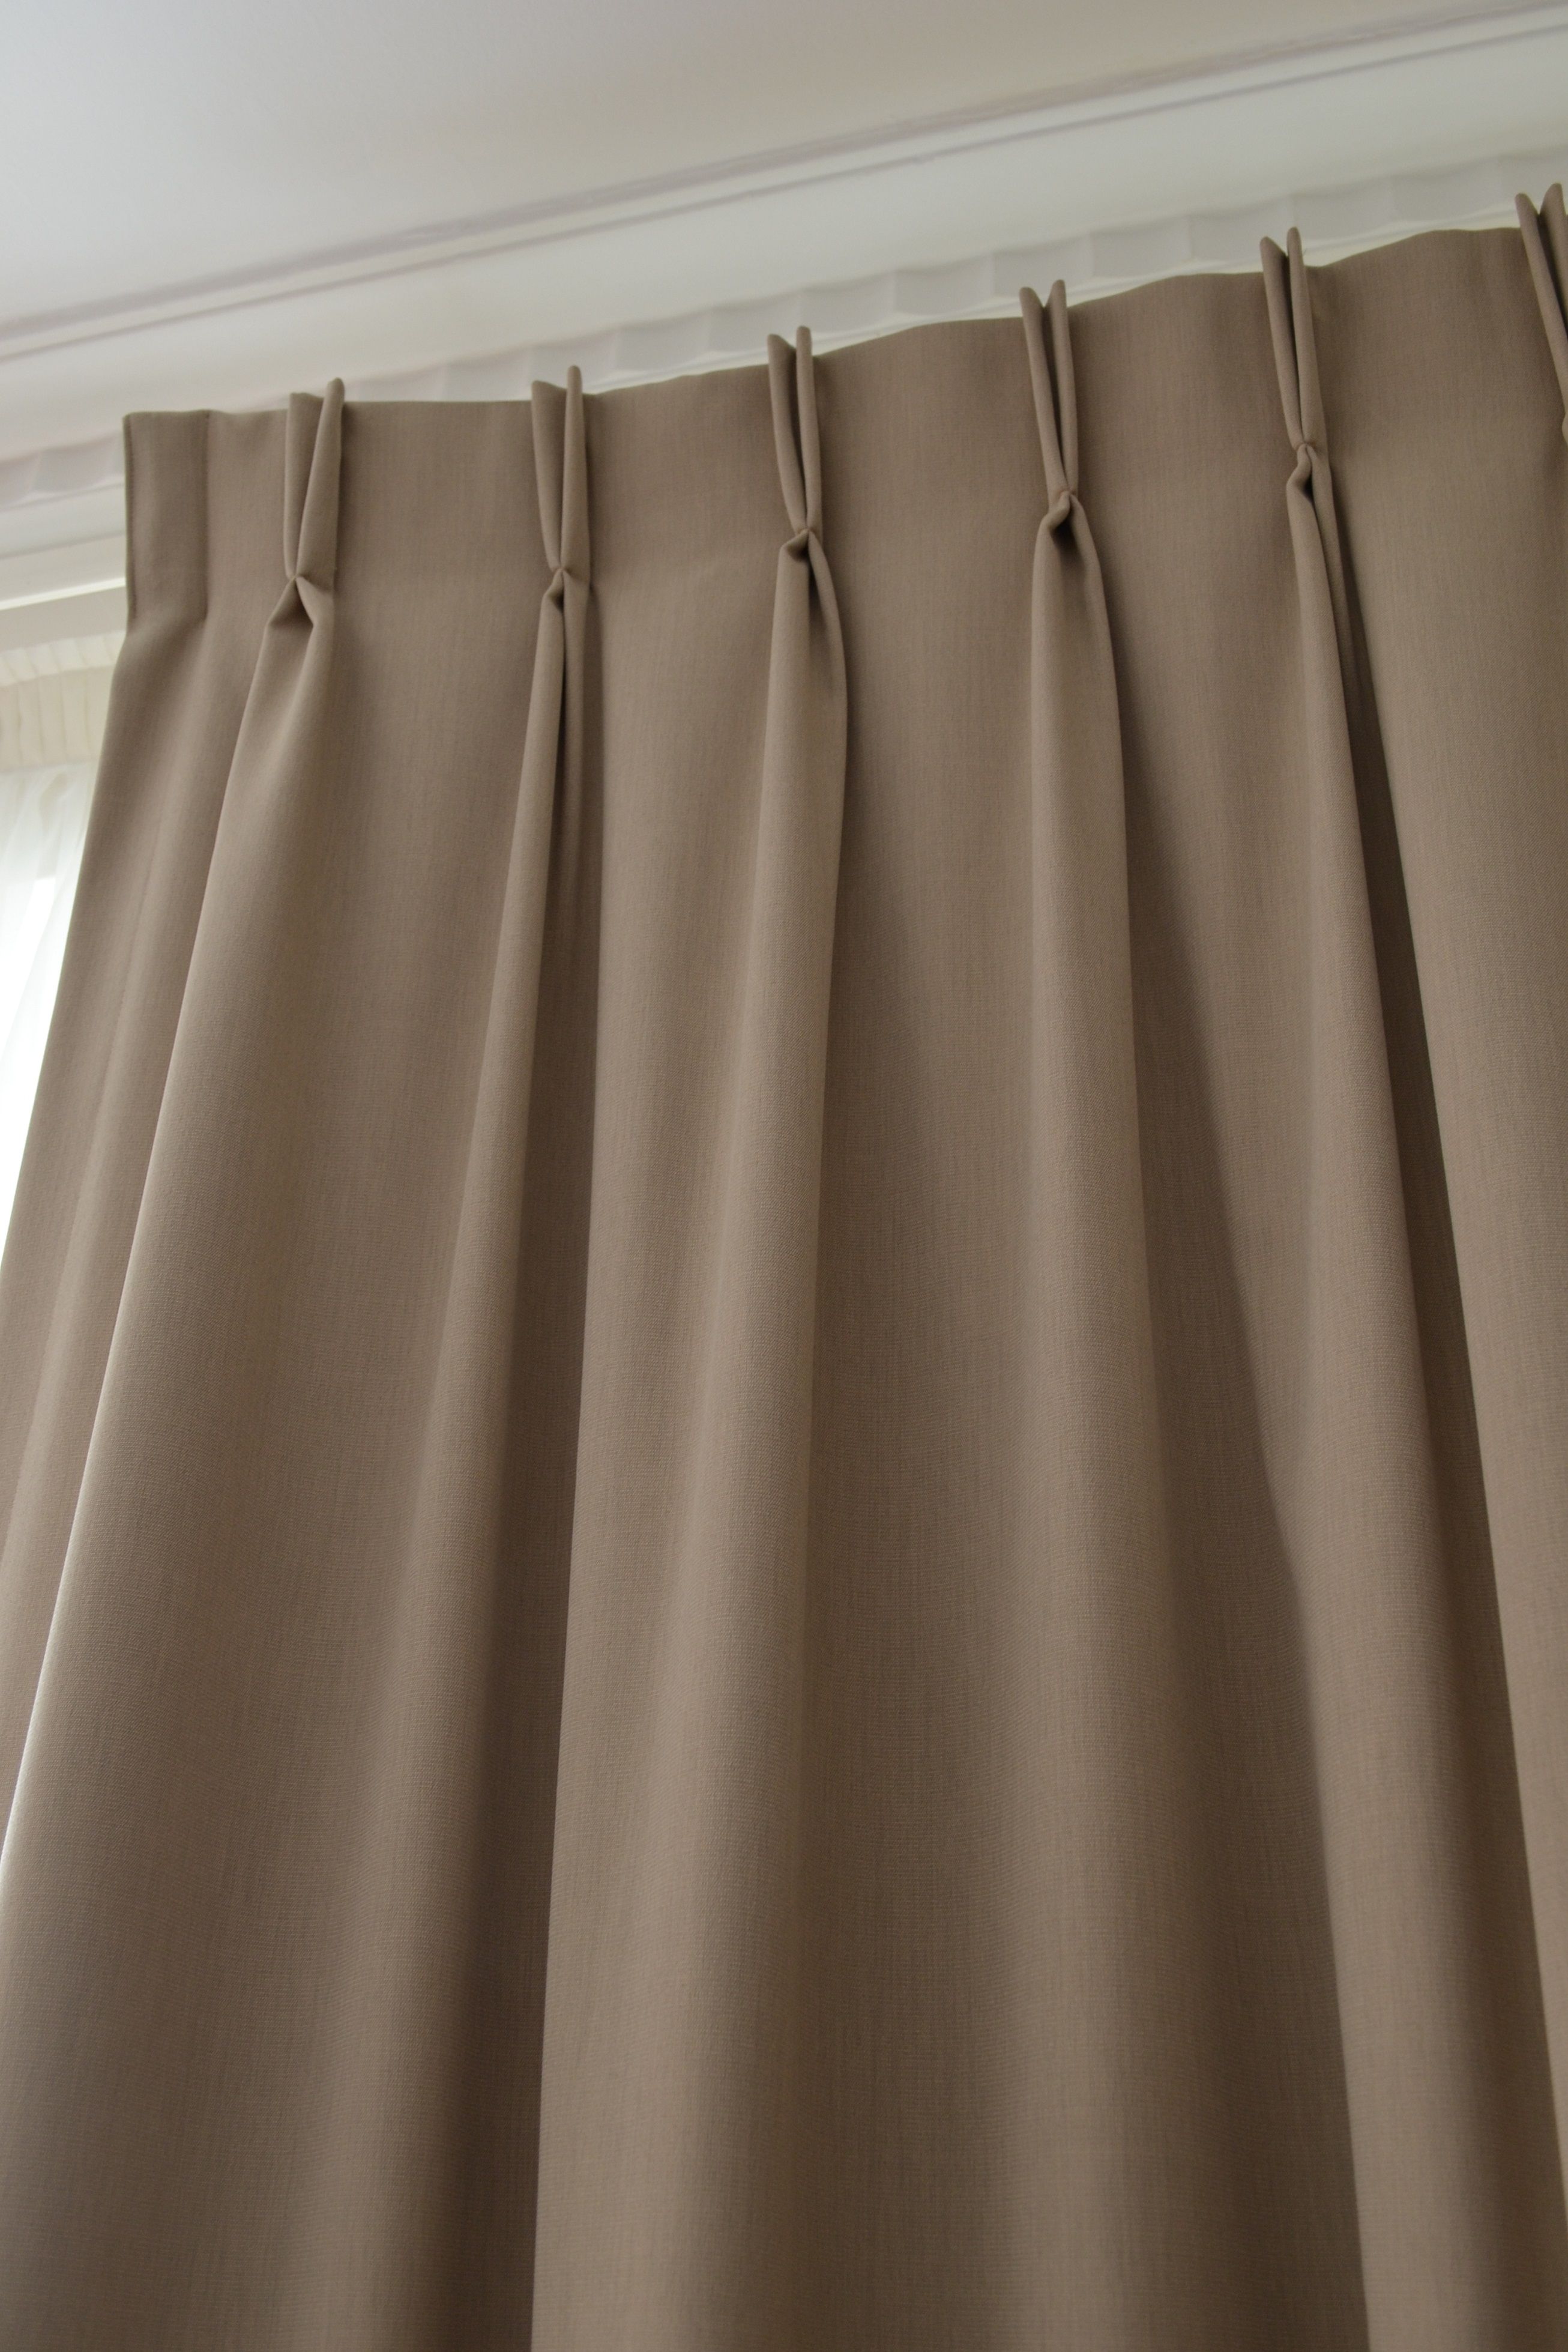 Double Pinch Pleat Curtains Curtains Pinterest Curtains Intended For Double Pleated Curtains (View 3 of 15)